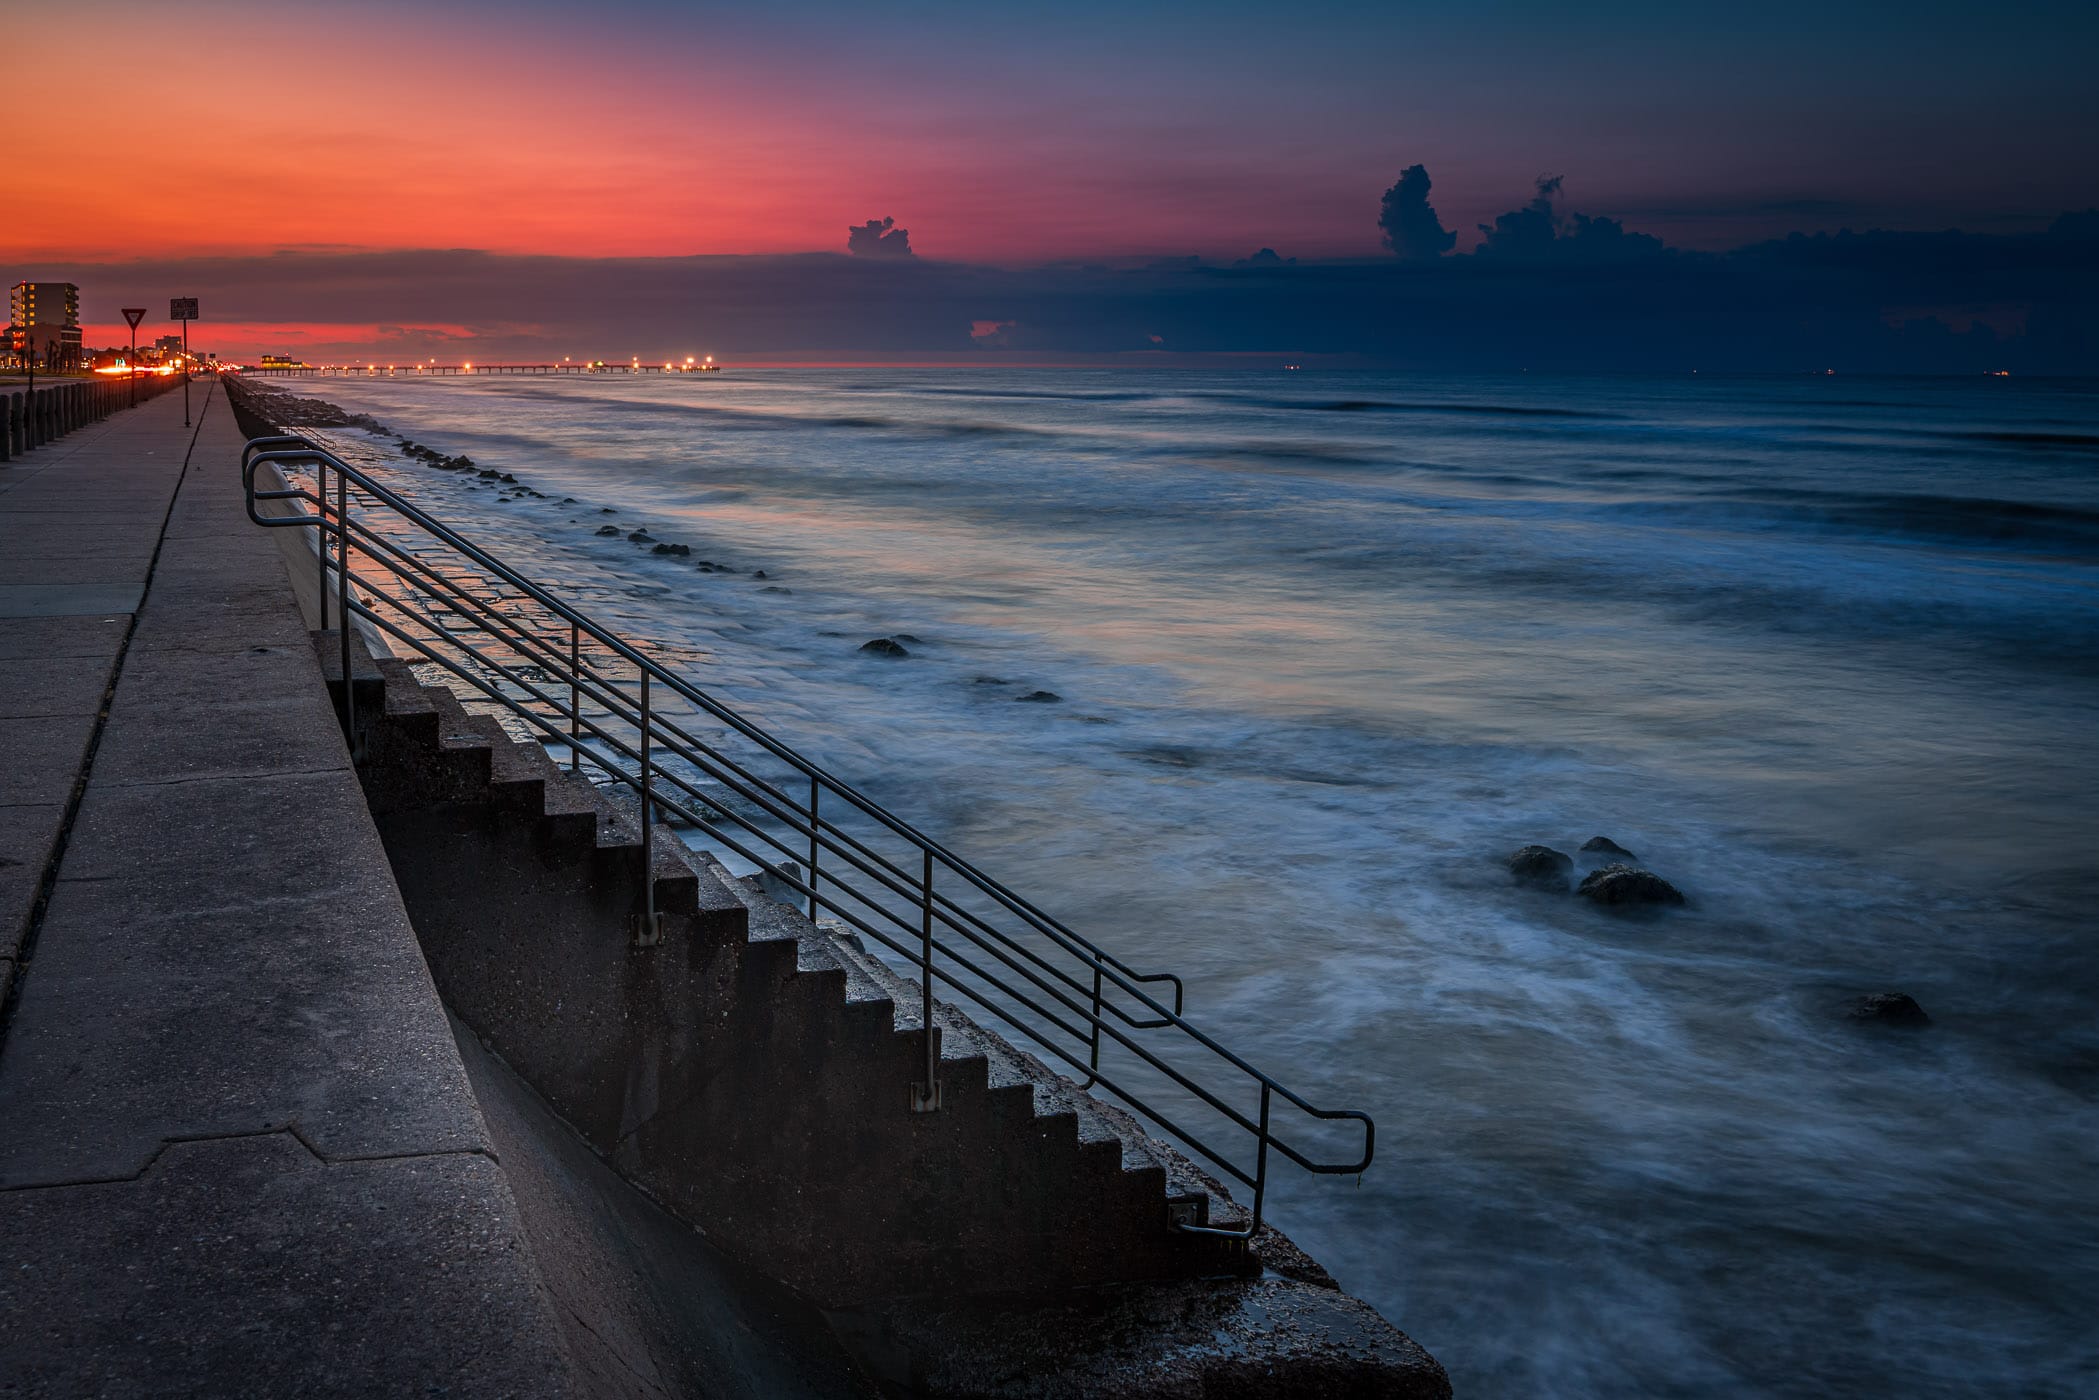 The first light of day on the Galveston, Texas, Seawall.